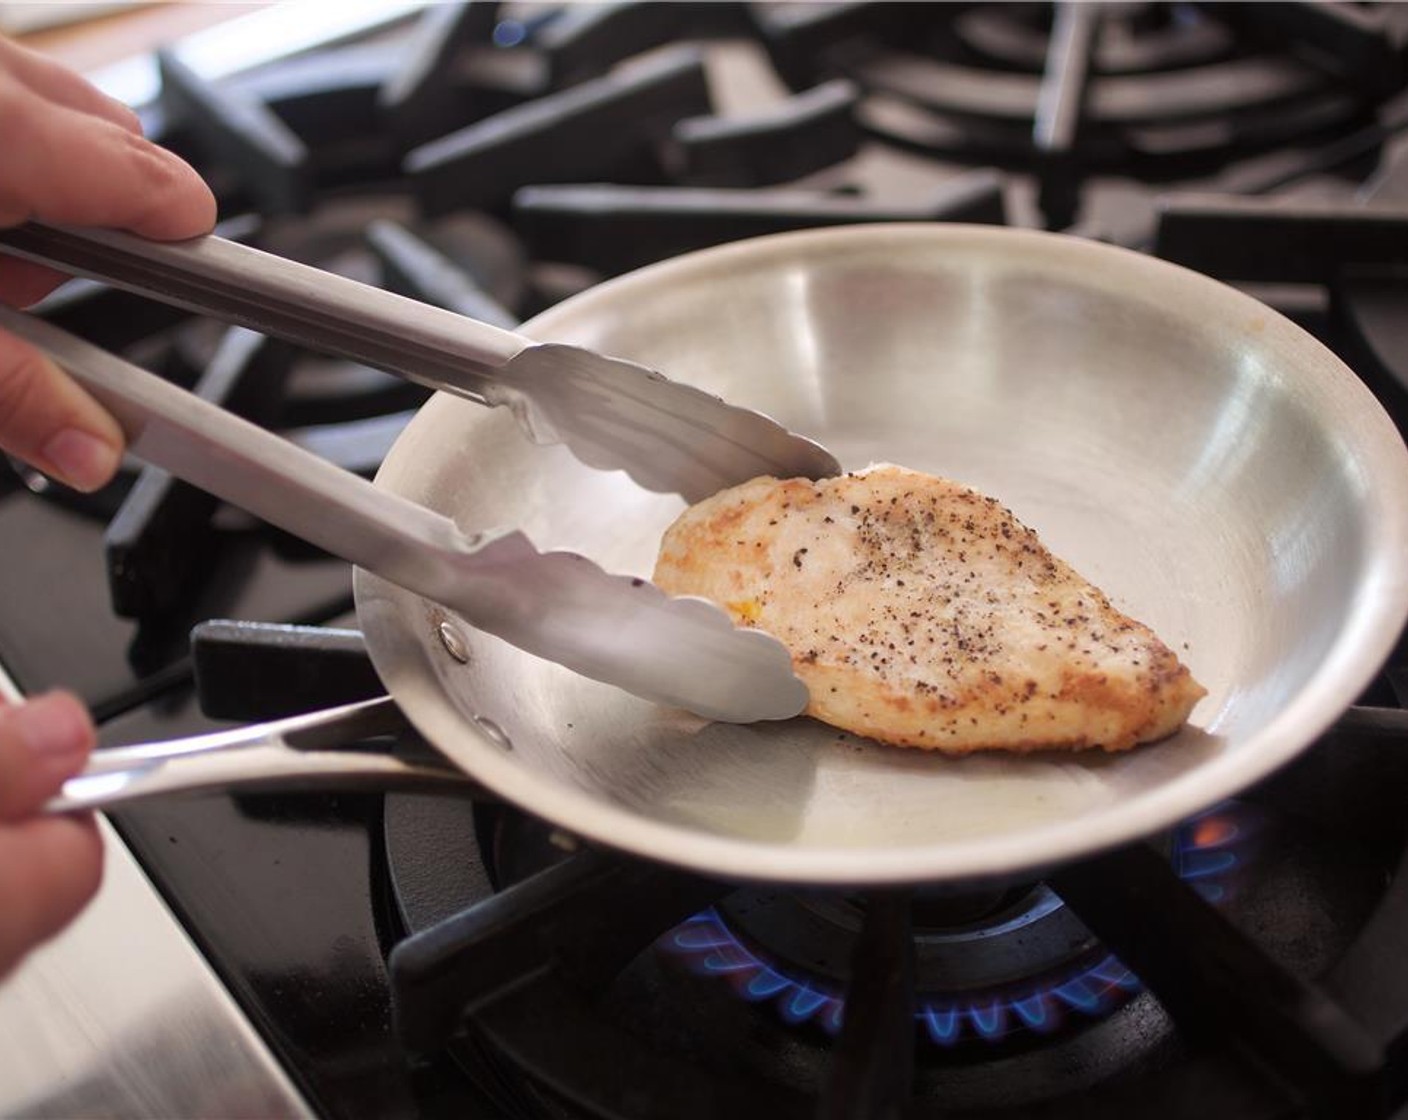 step 7 Heat a large saucepan or Dutch oven over medium high heat with Olive Oil (1 tsp). When the oil is hot, add the chicken and sear on each side for 4 minutes until fully cooked.